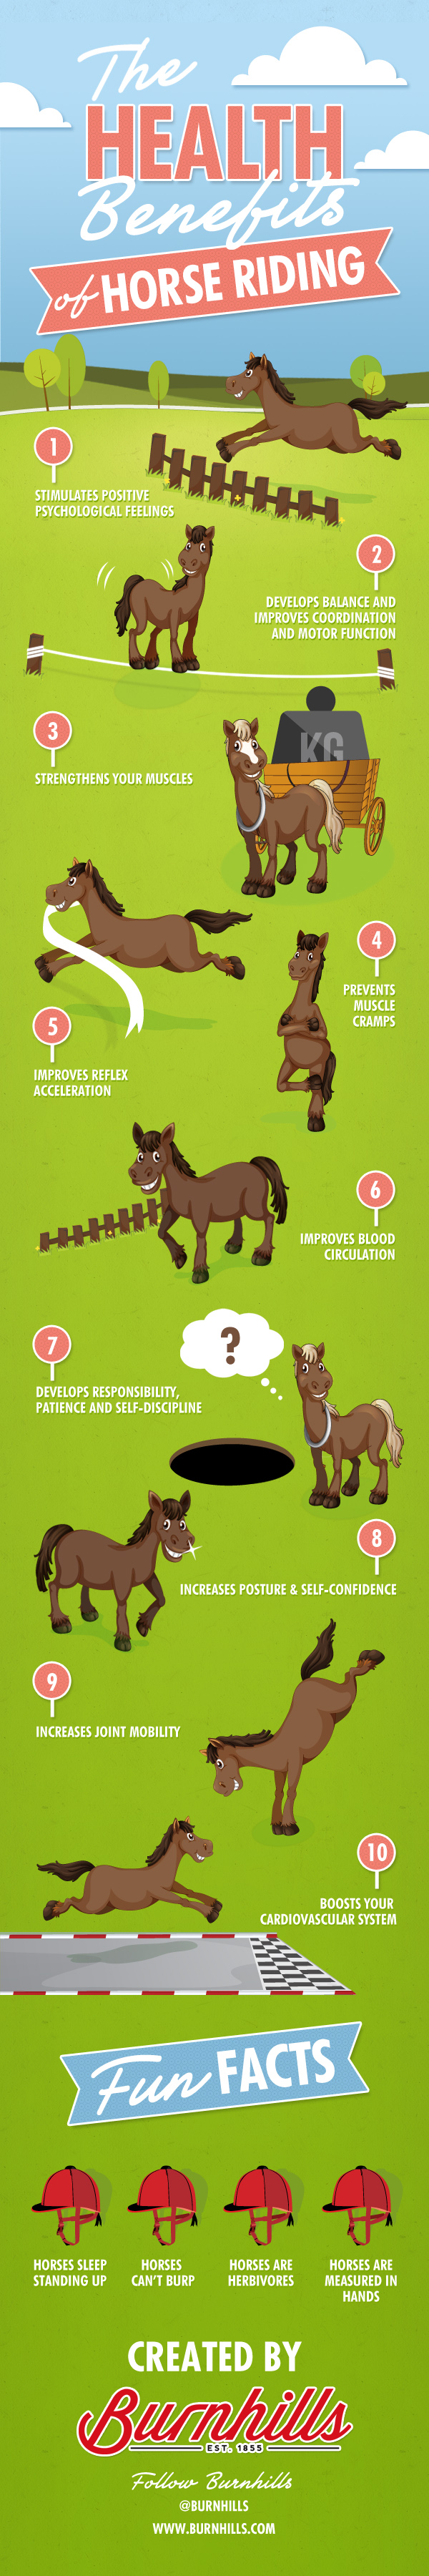 The Health Benefits Of Horse Riding